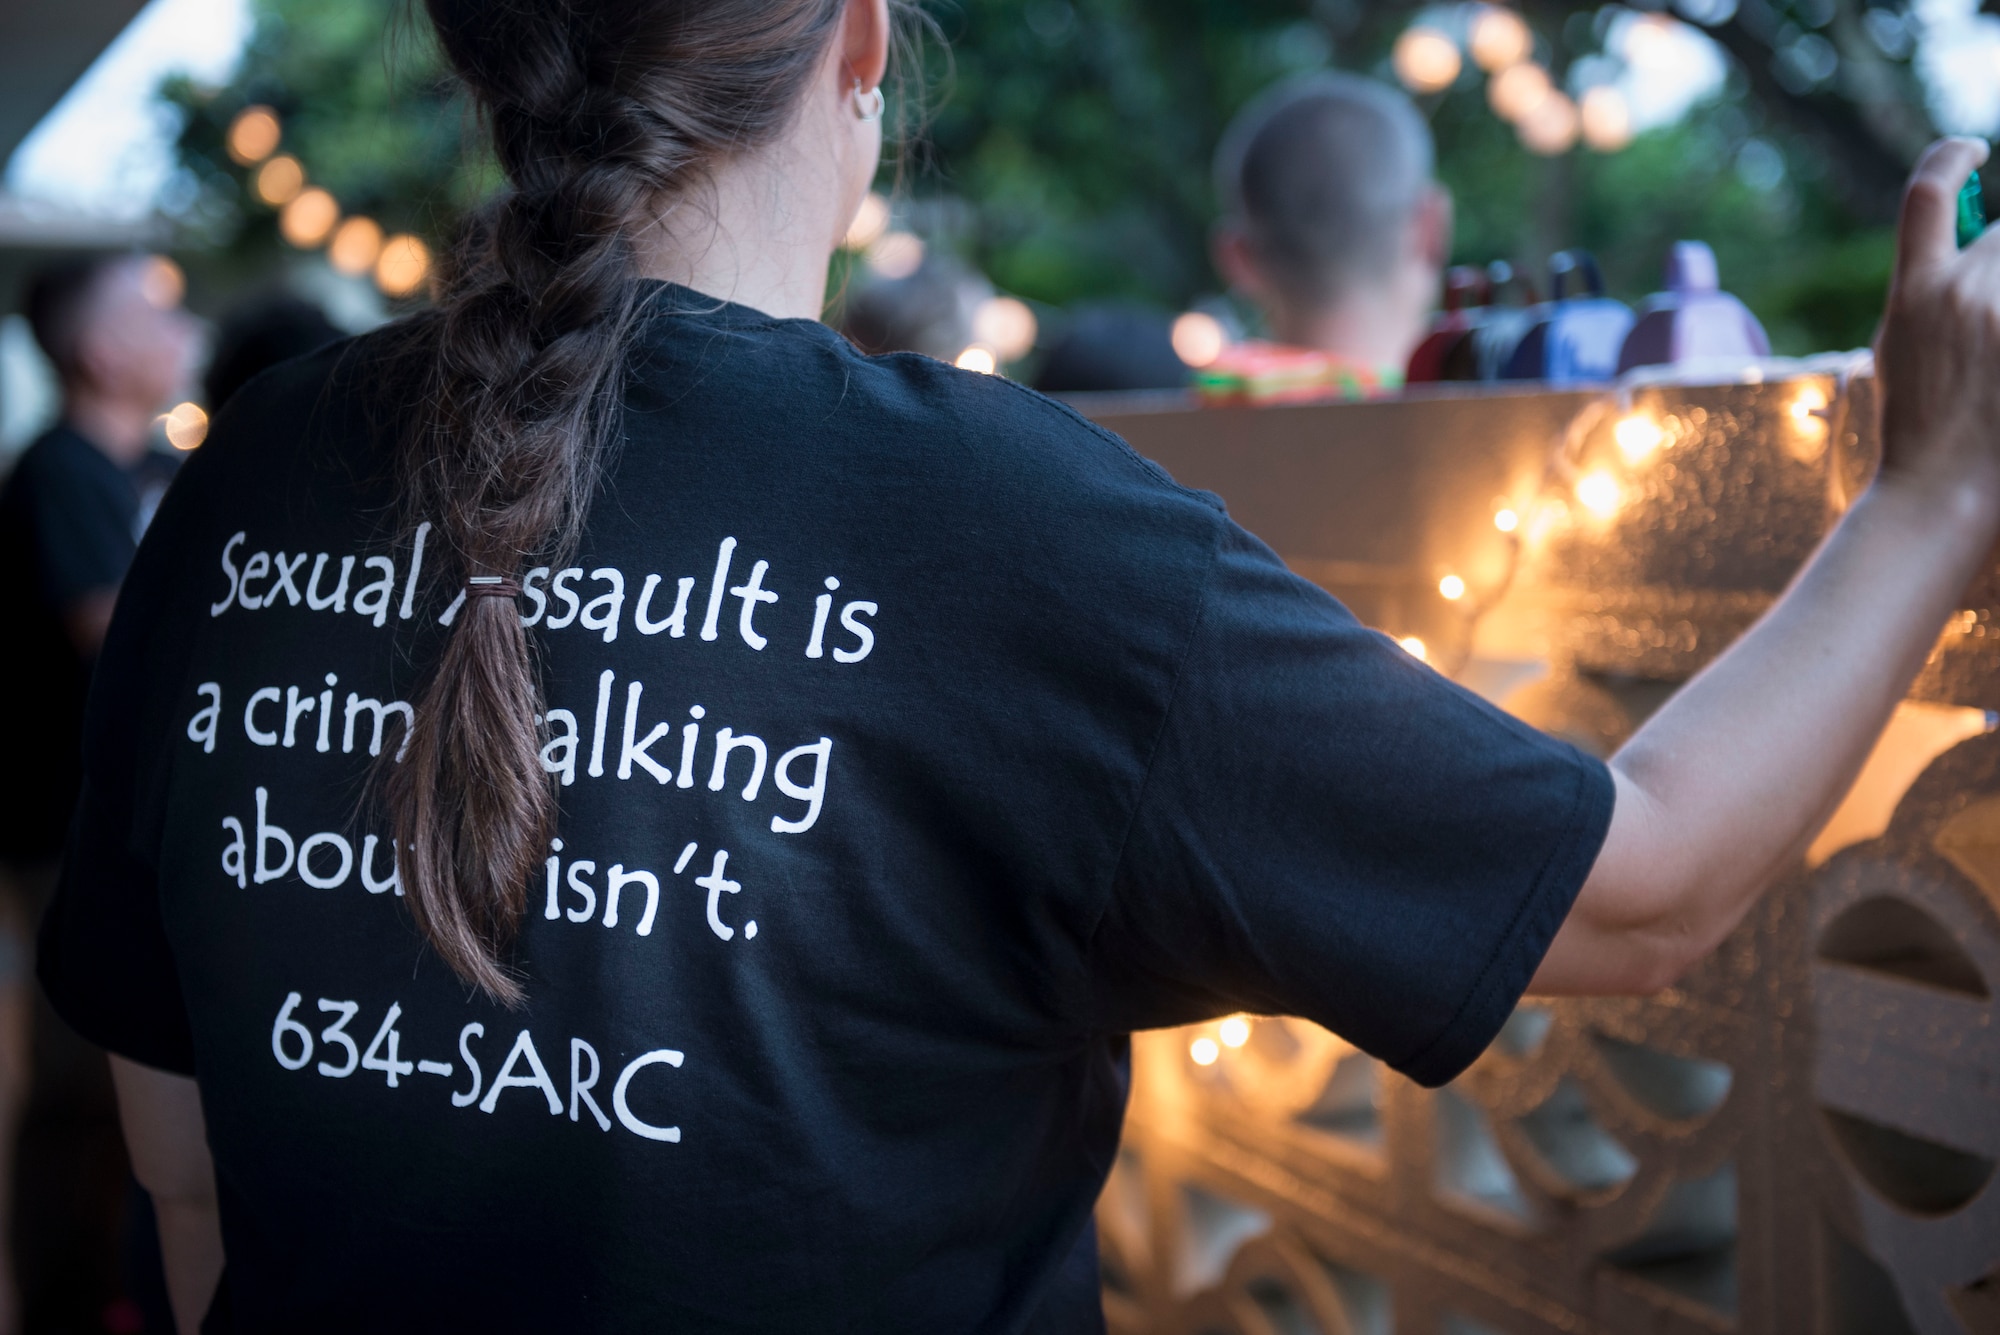 Women, men and children united together and marched against sexual assault during the Take Back the Night march April 29, 2016, at Kadena Air Base, Japan. The Take Back the Night event is held annually on Kadena Air Base to raise awareness around the installation about sexual assault. (U.S. Air Force photo by Senior Airman Omari Bernard)